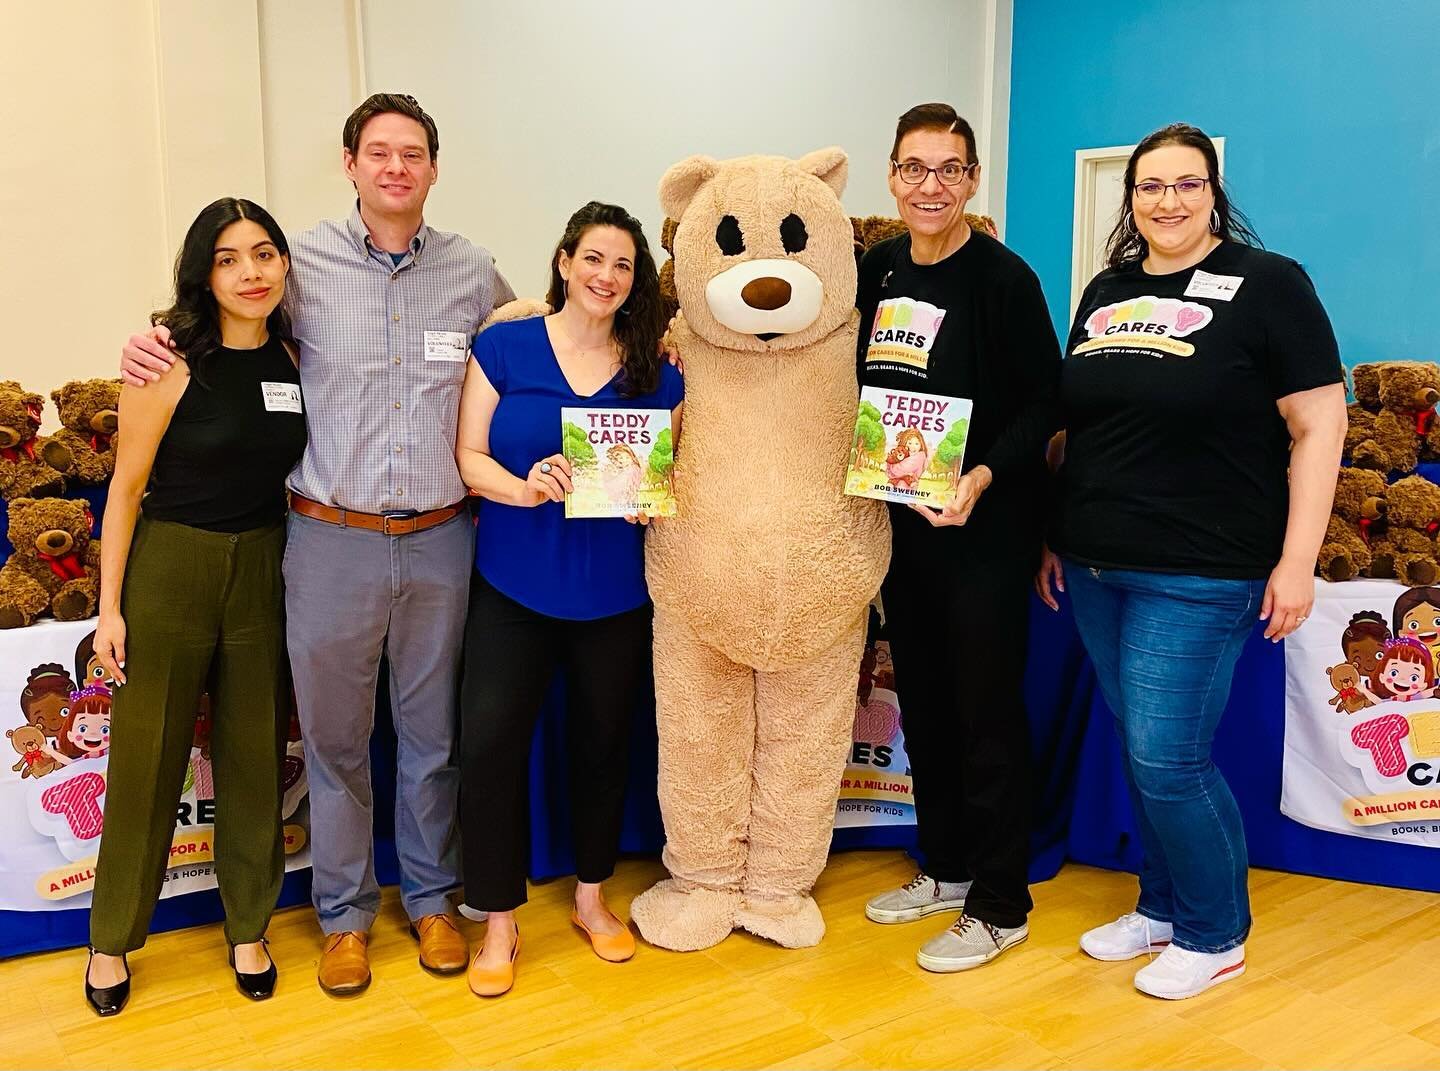 Kicking off @teddycares4kids at @vogelalcove with the @dallaslifeshelter and Dala team. Giving out 200 Teddy 🧸 and📕 to kids at Vogel today. One of our fave events, watching the big smiles on the kids&rsquo; faces, especially when they see the Teddy